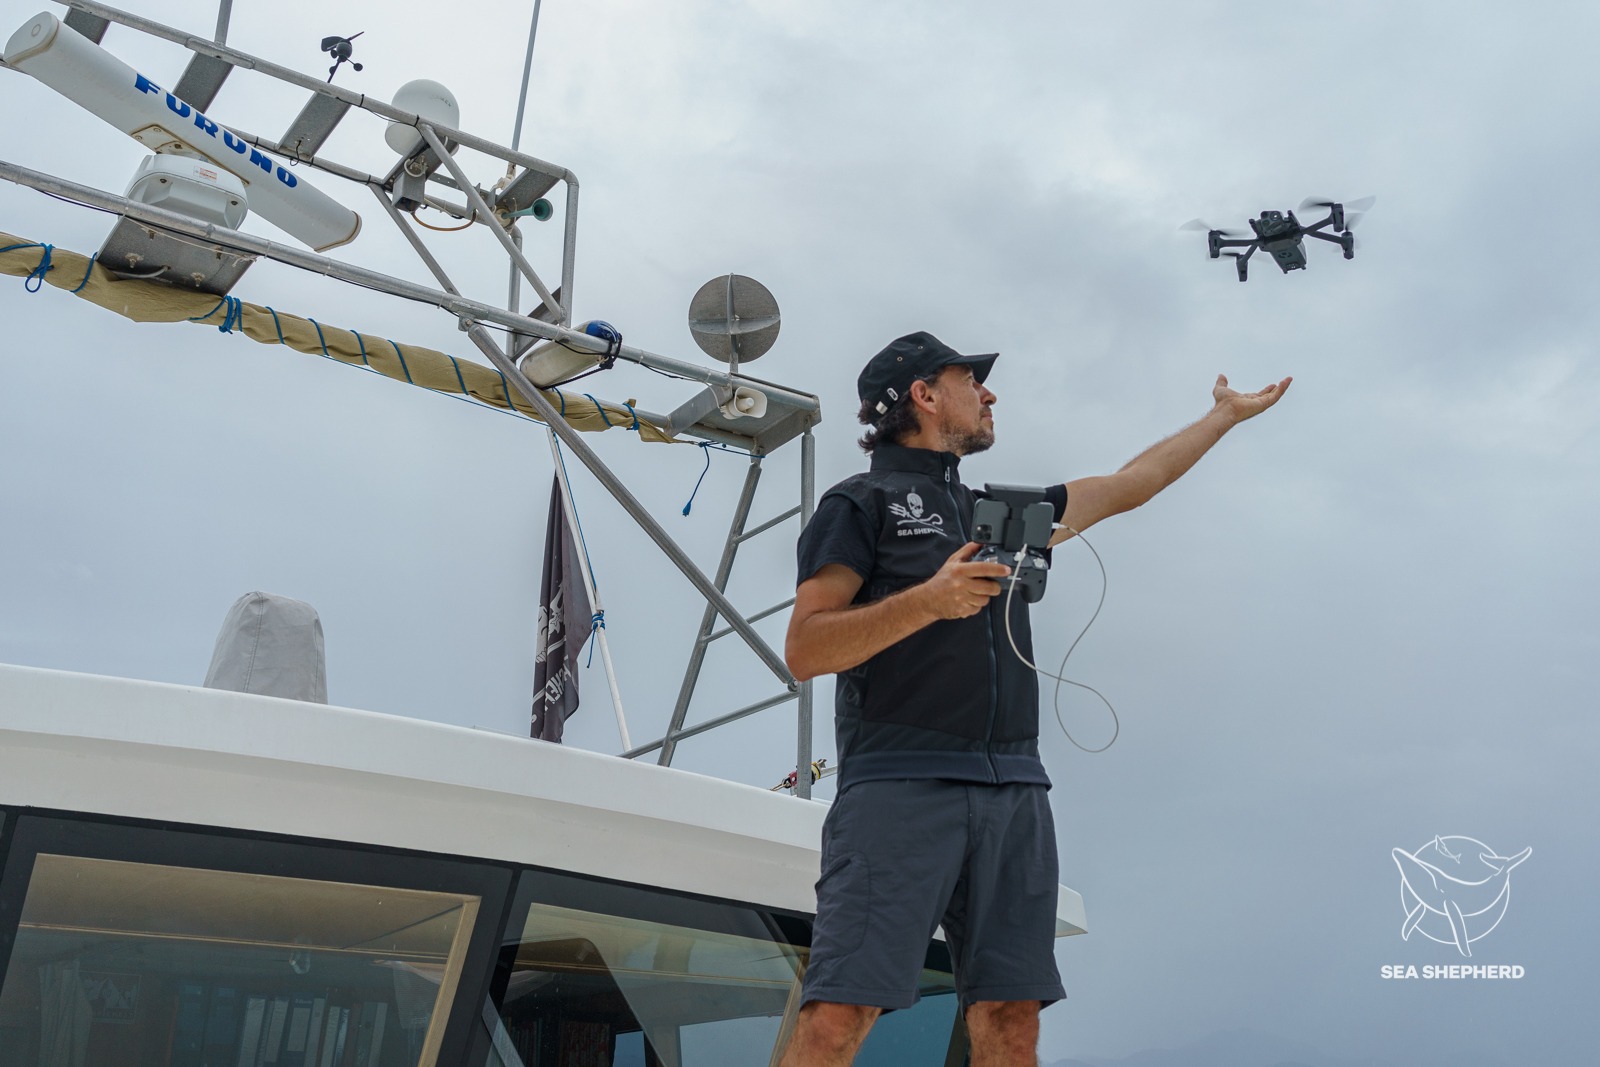 A man standing on the deck of a ship points at a drone flying above him.